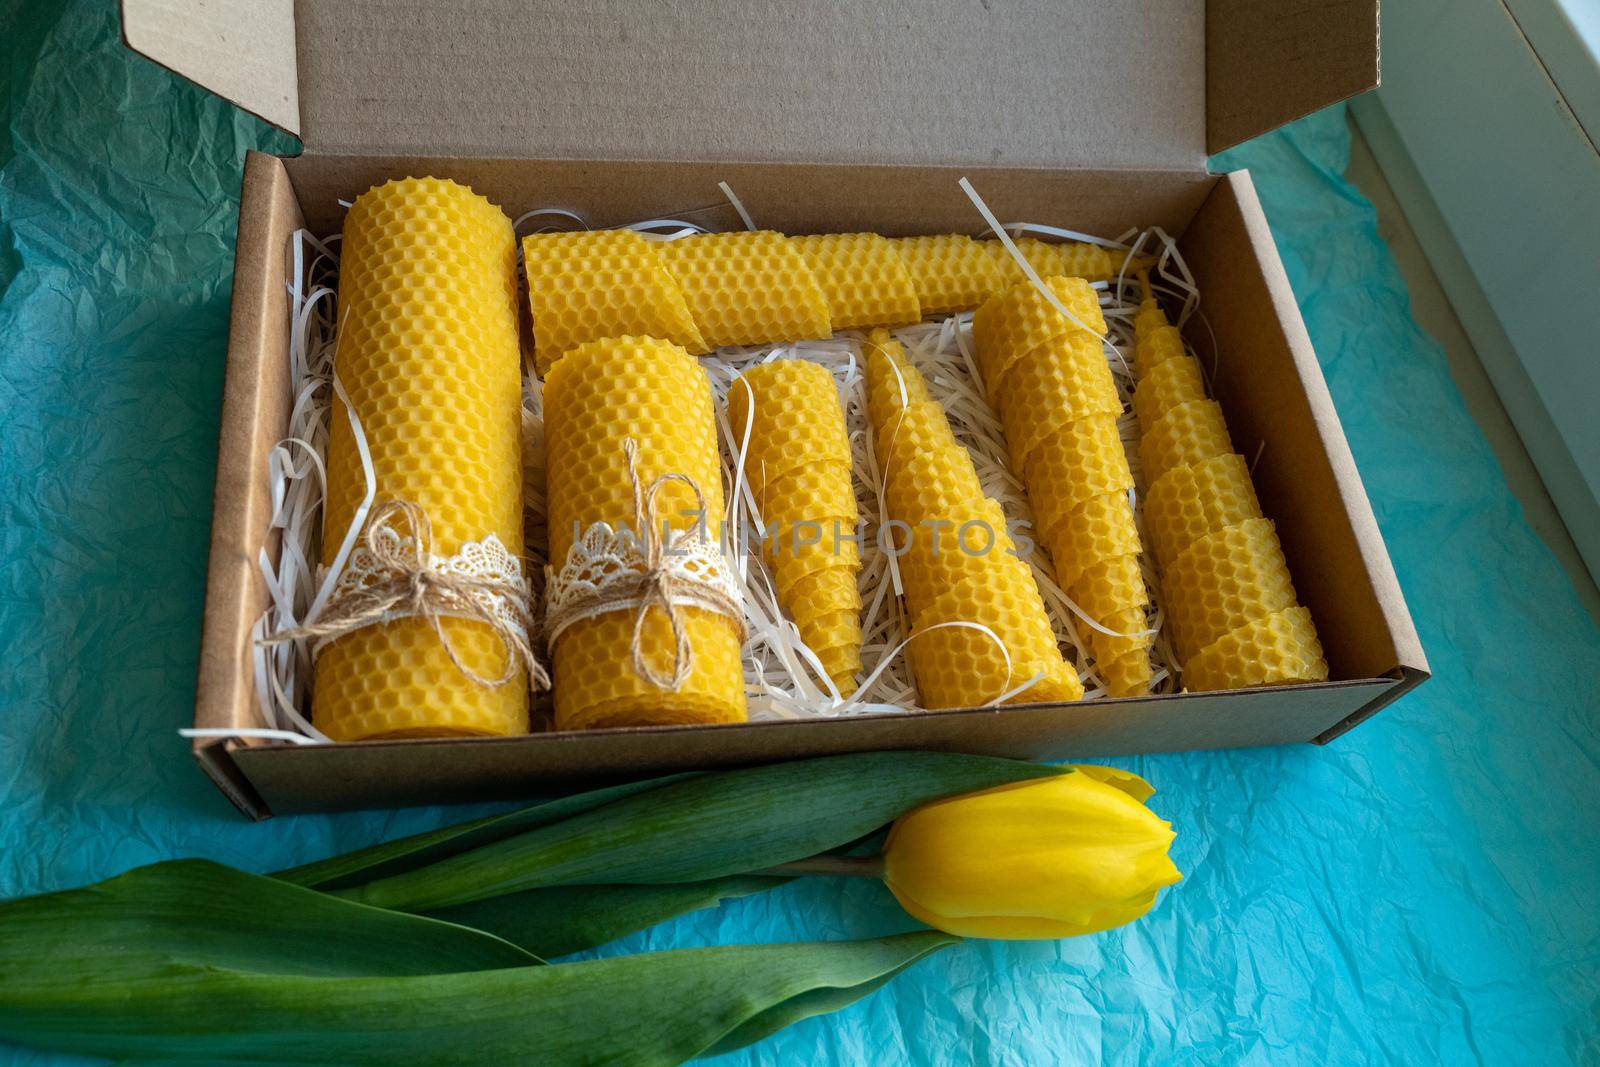 Seven beeswax candles in a box. The candles are decorated with lace and tied with a jute rope. by Matiunina